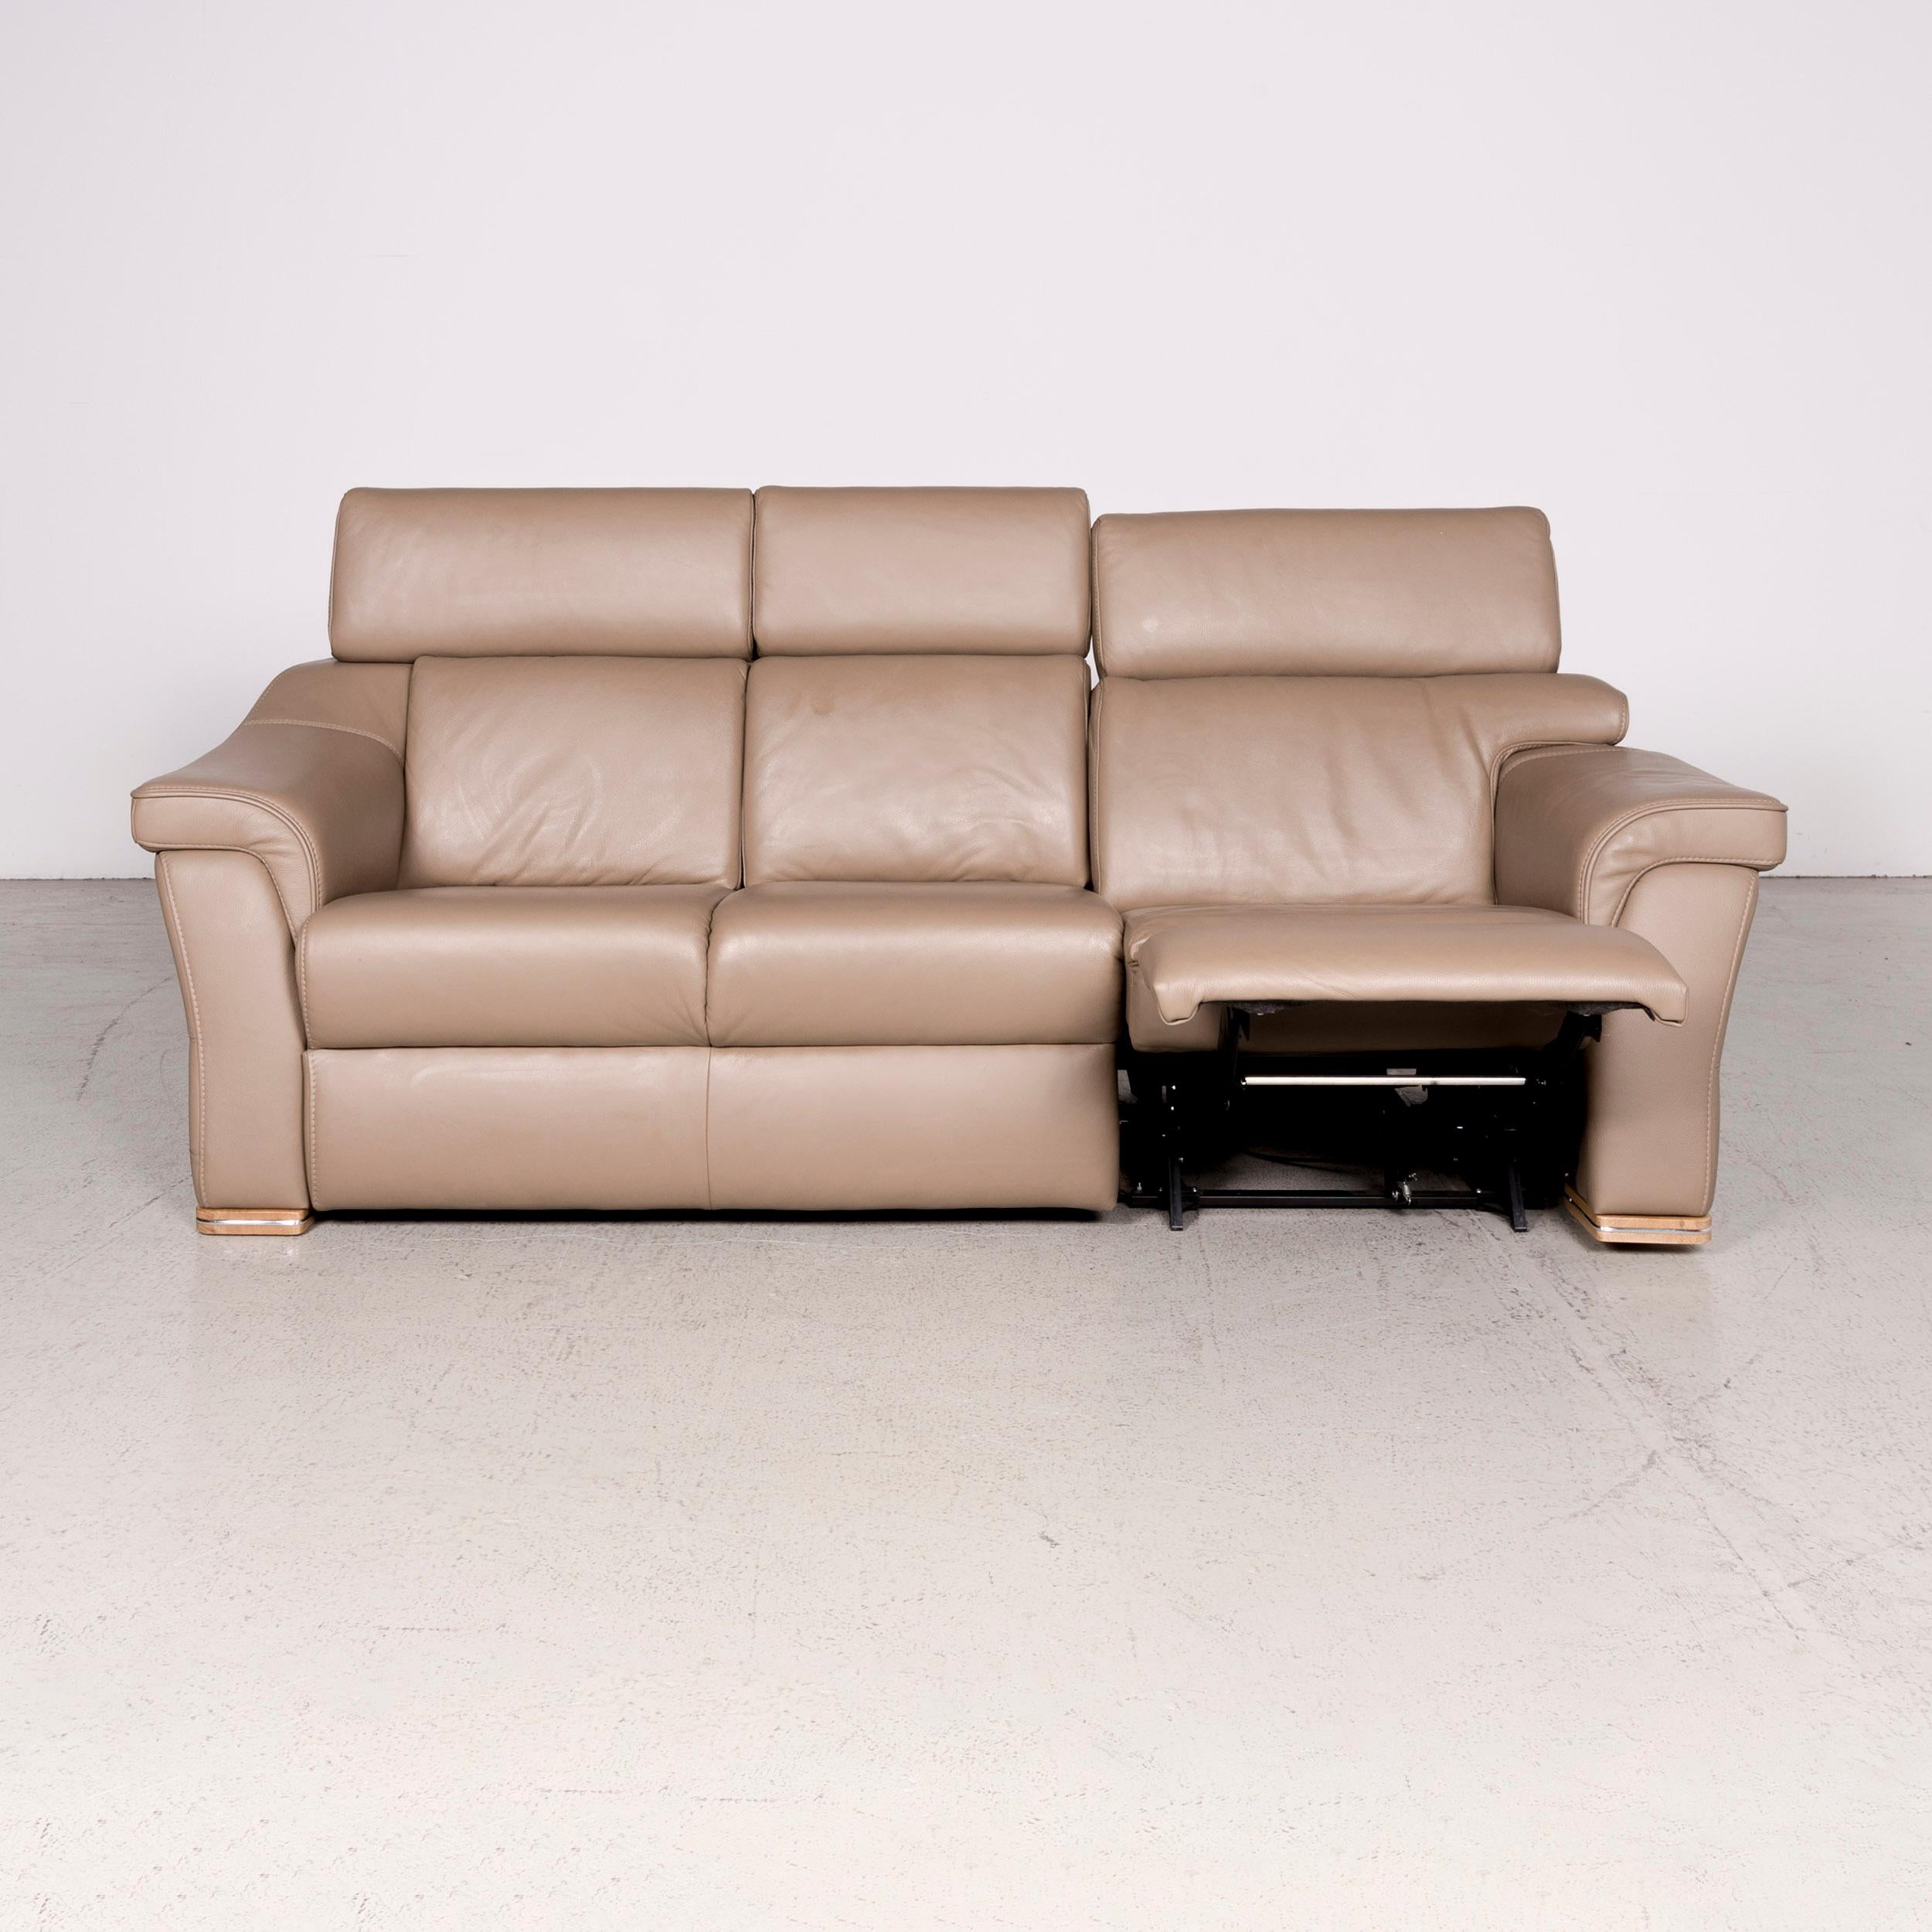 Himolla Designer Leather Sofa Set Brown Genuine Leather Two-Seat Three-Seat In Excellent Condition For Sale In Cologne, DE